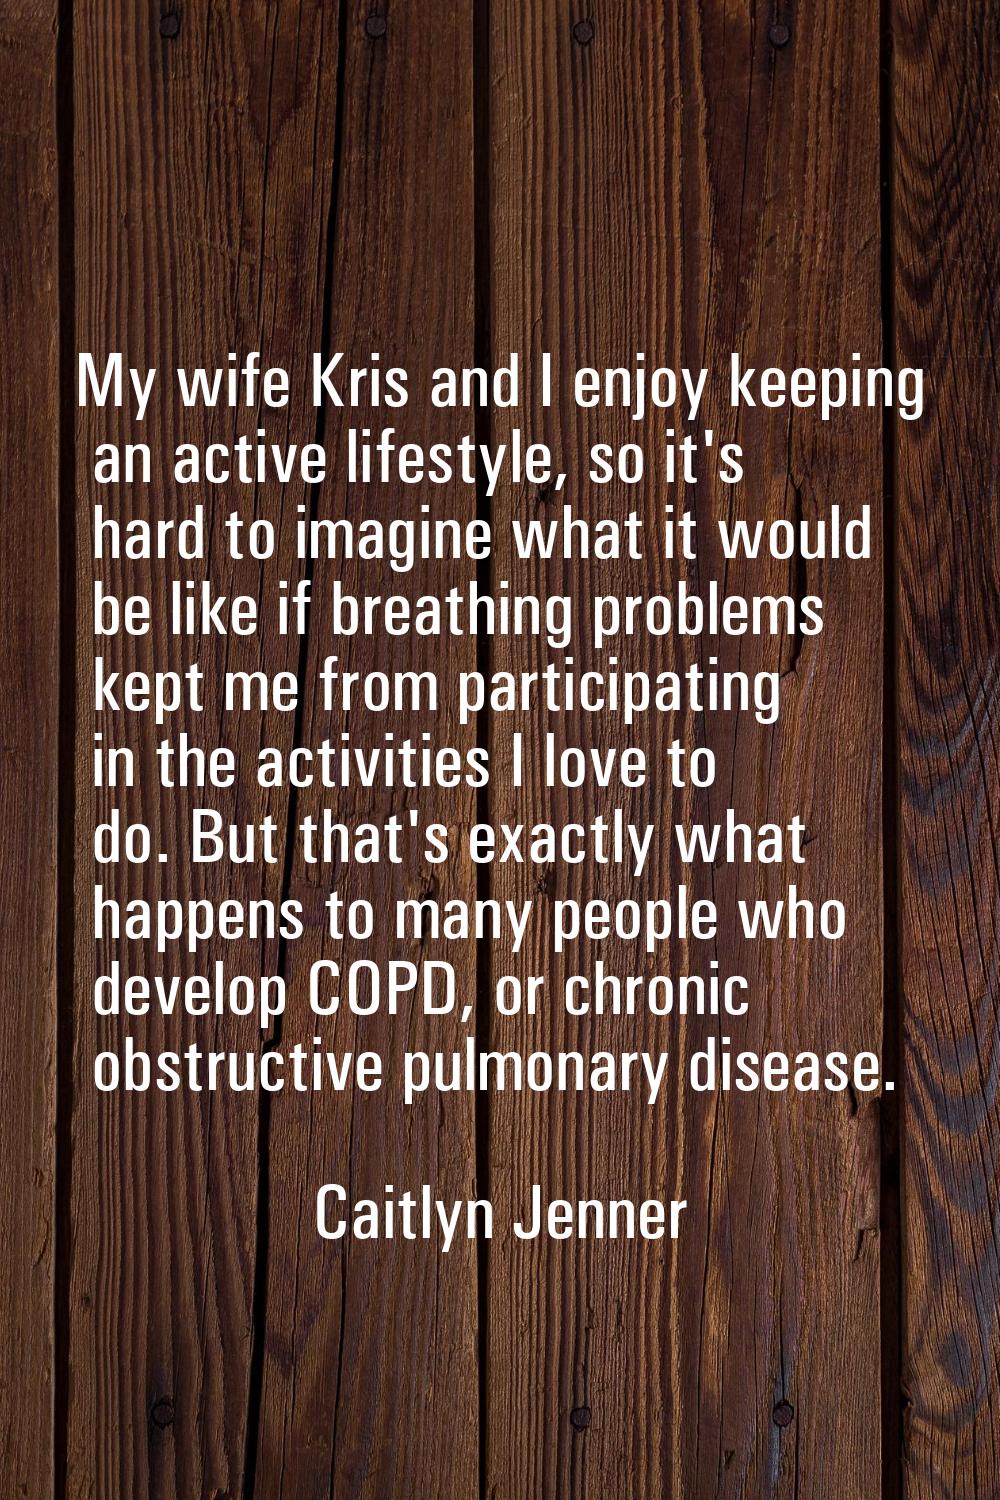 My wife Kris and I enjoy keeping an active lifestyle, so it's hard to imagine what it would be like